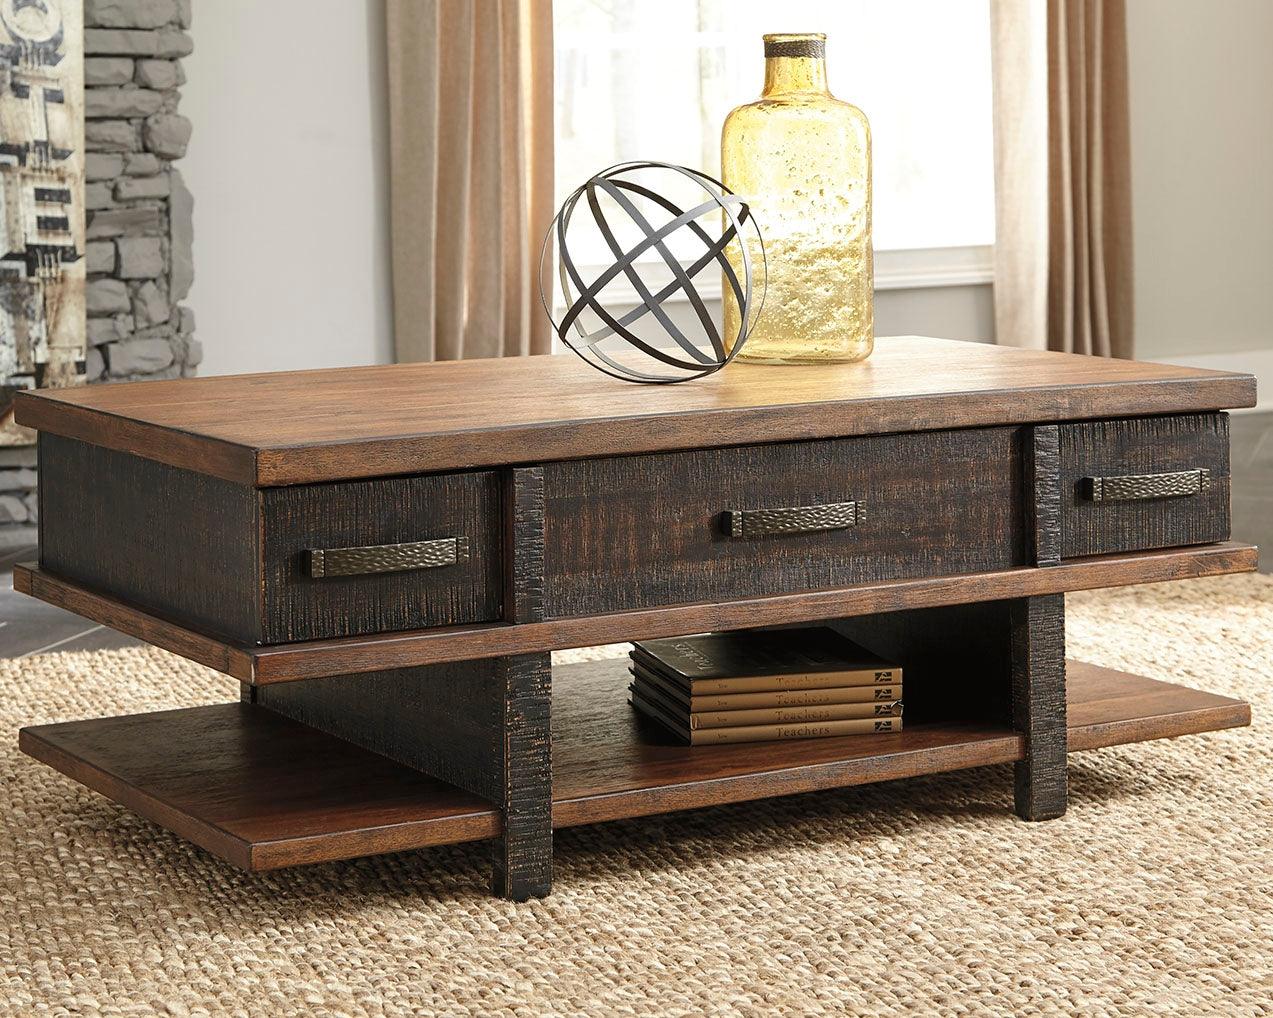 Stanah Two-tone Coffee Table With Lift Top - Ella Furniture